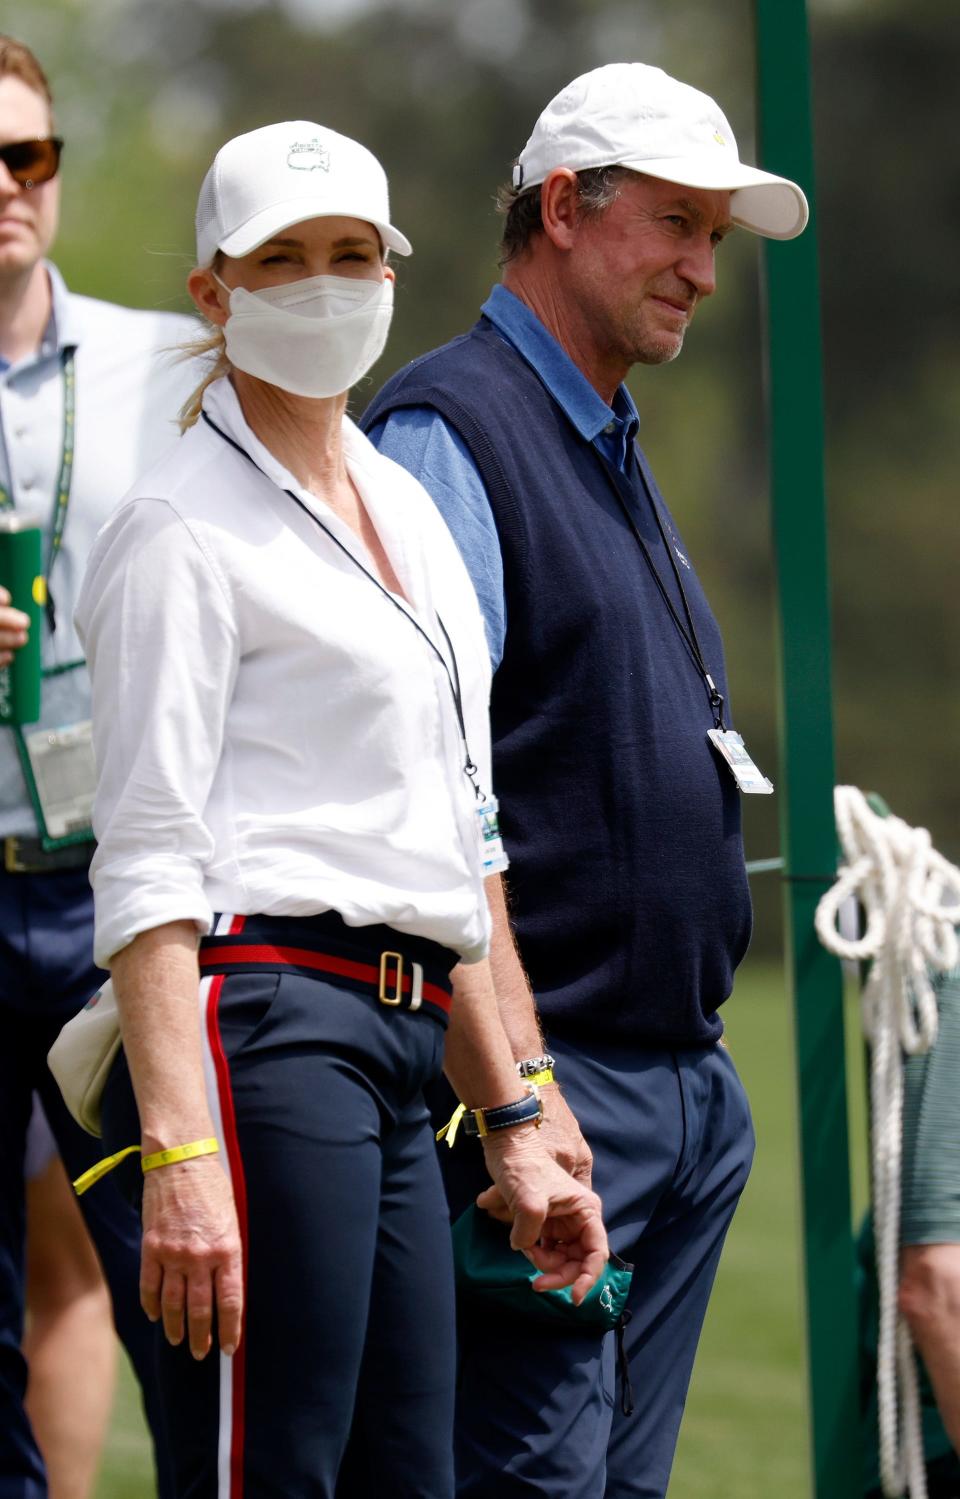 Wayne Gretzky and his wife, Janet, watch Dustin Johnson on No. 13 during Thursday's first round for the Masters at Augusta National Golf Club, Thursday, April 8, 2021, in Augusta, Georgia.